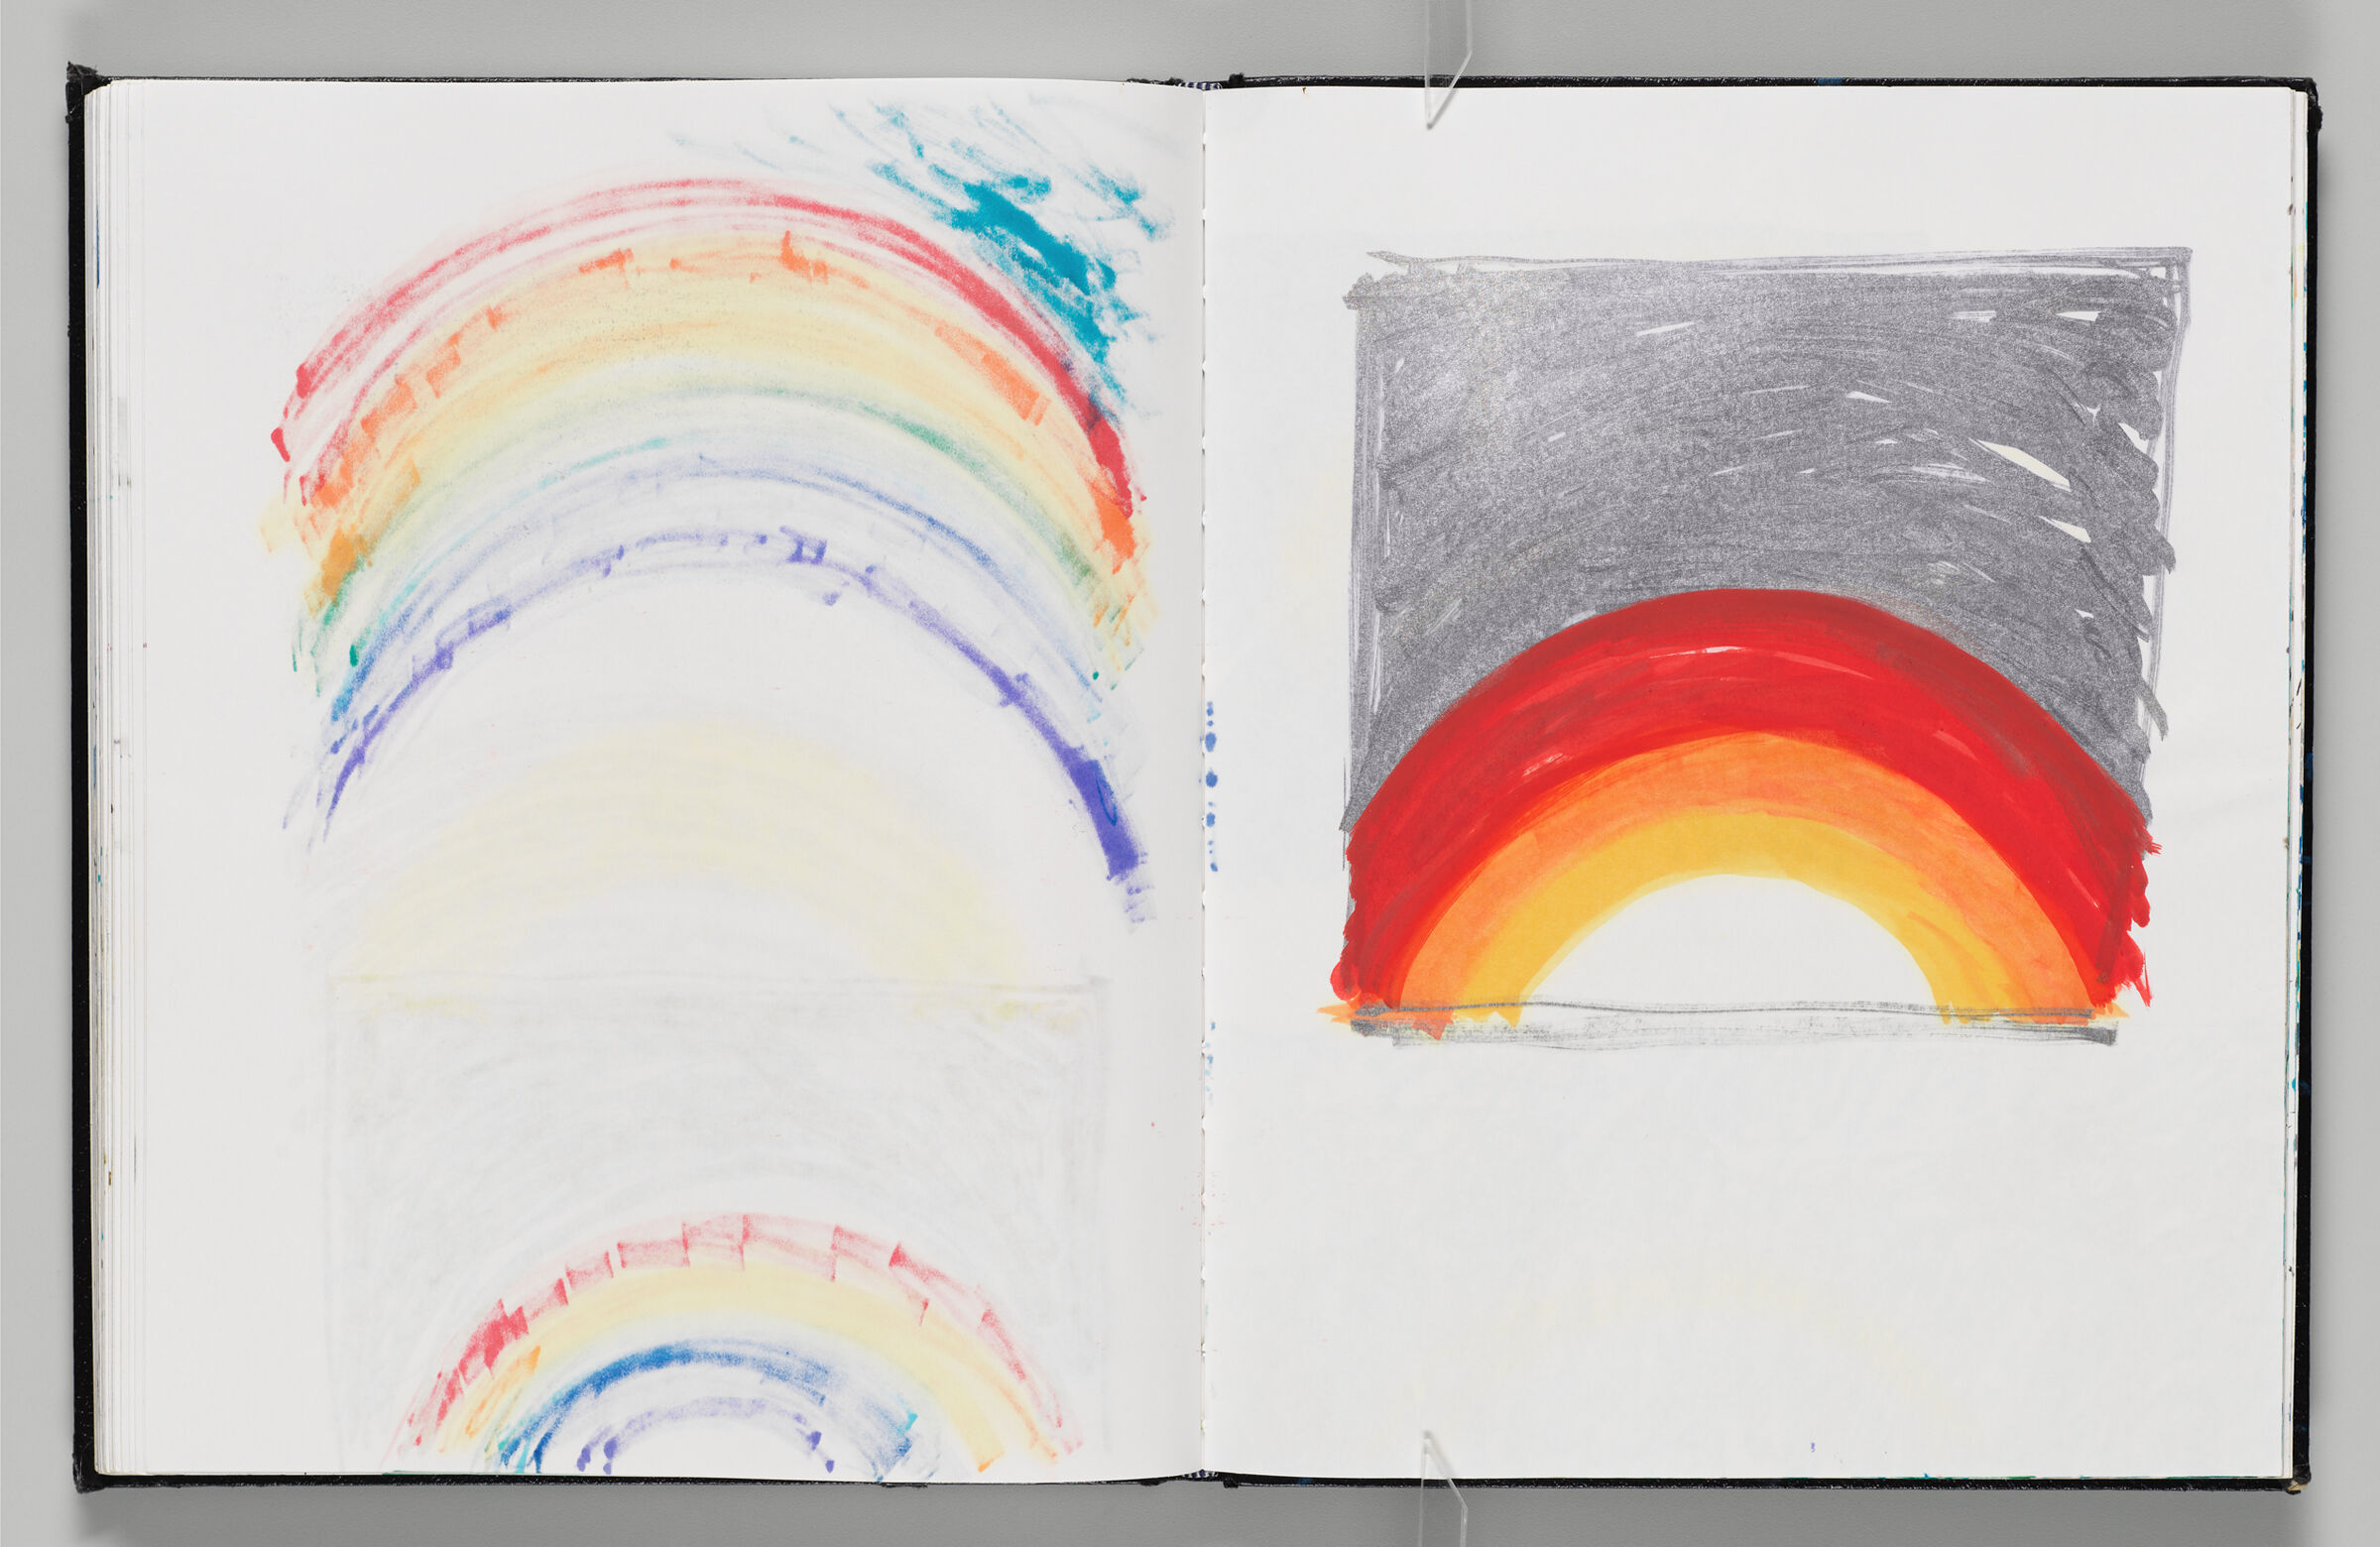 Untitled (Bleed-Through Of Previous Page, Left Page); Untitled (Rainbow Design For Rosenthal, Right Page)